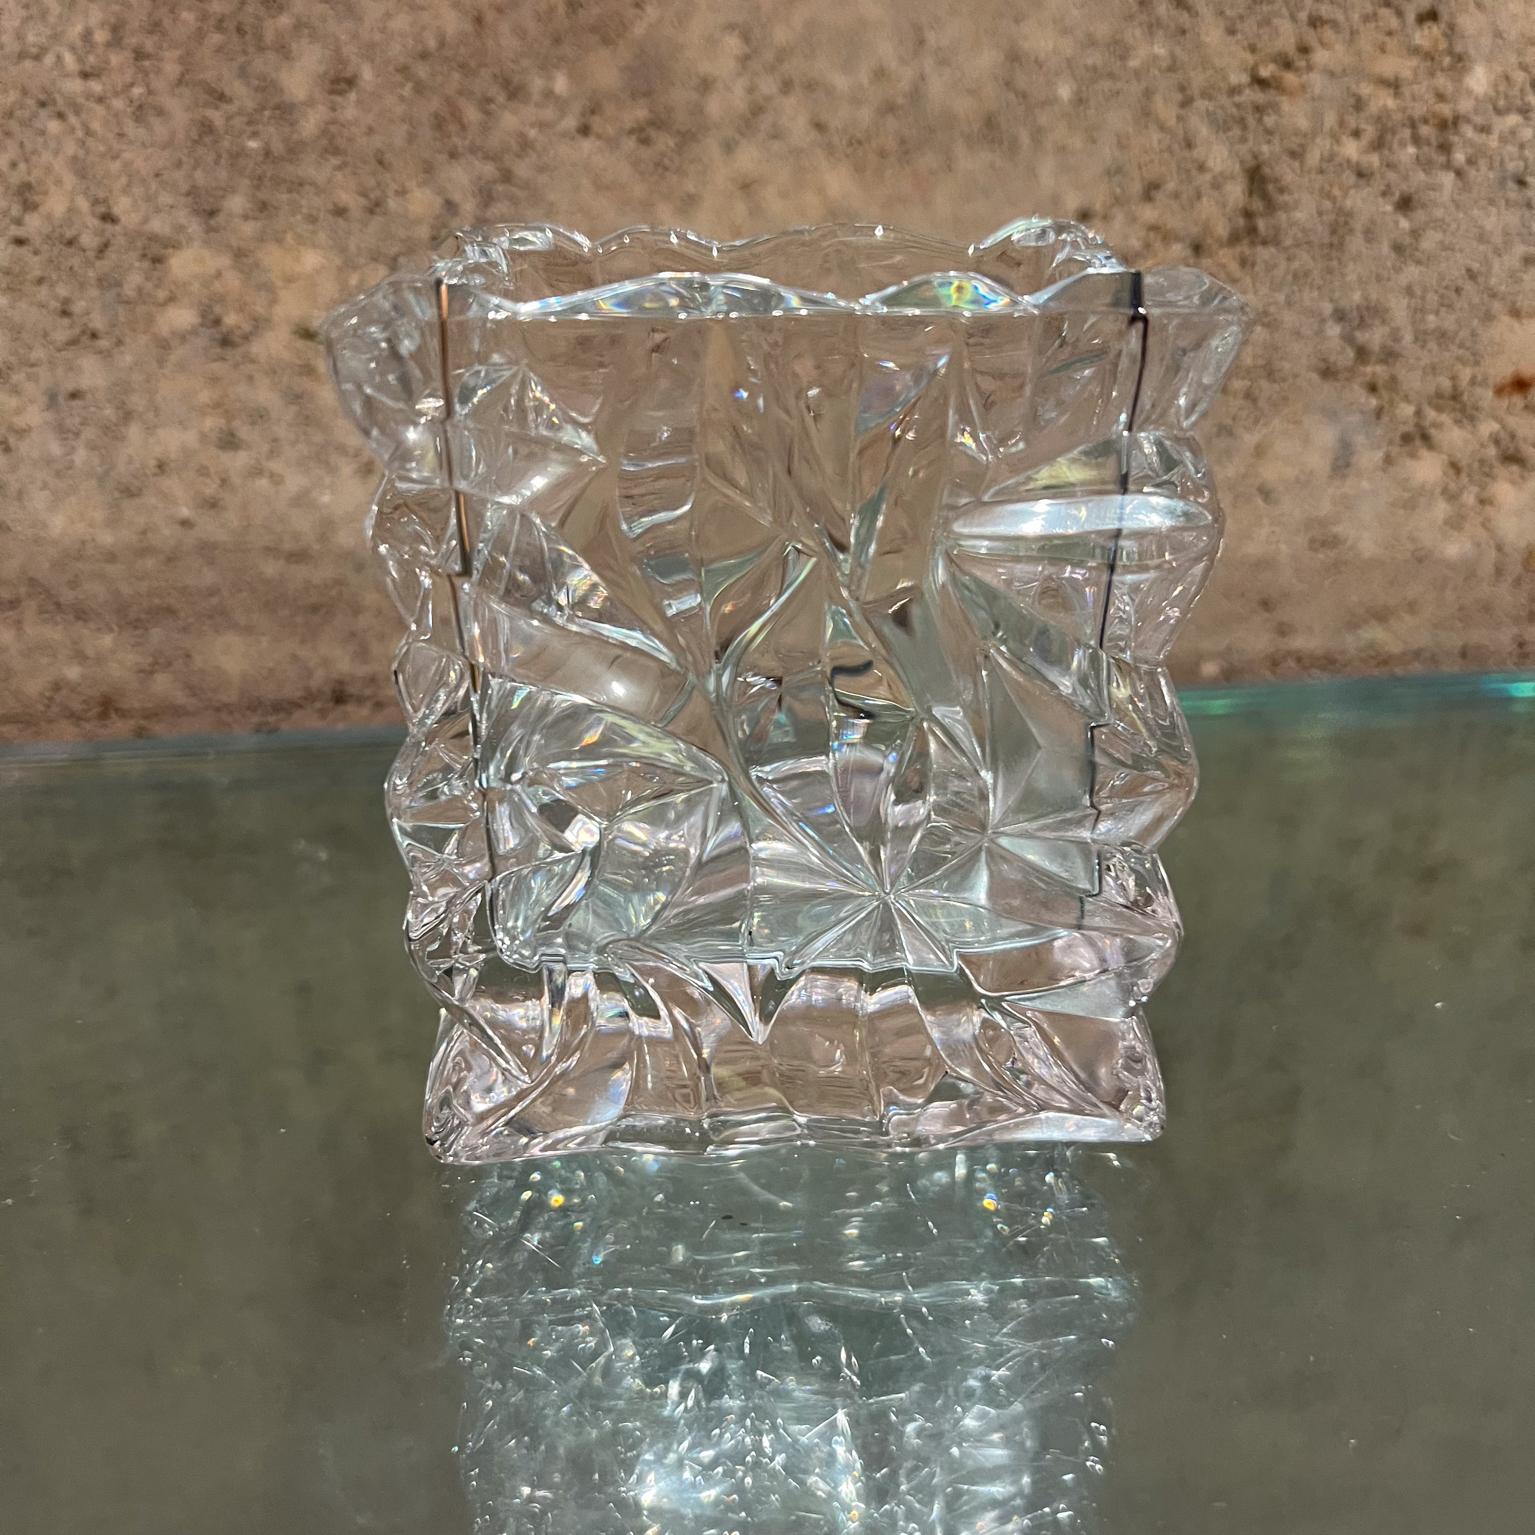 1970s Rosenthal Studio Linie Crystal Crinkle Vase Germany
3.5 h x 3 w x 2.25 d
Rosenthal Studio Linie Germany
paperweight or vase
Preowned original vintage condition
See all images listed.